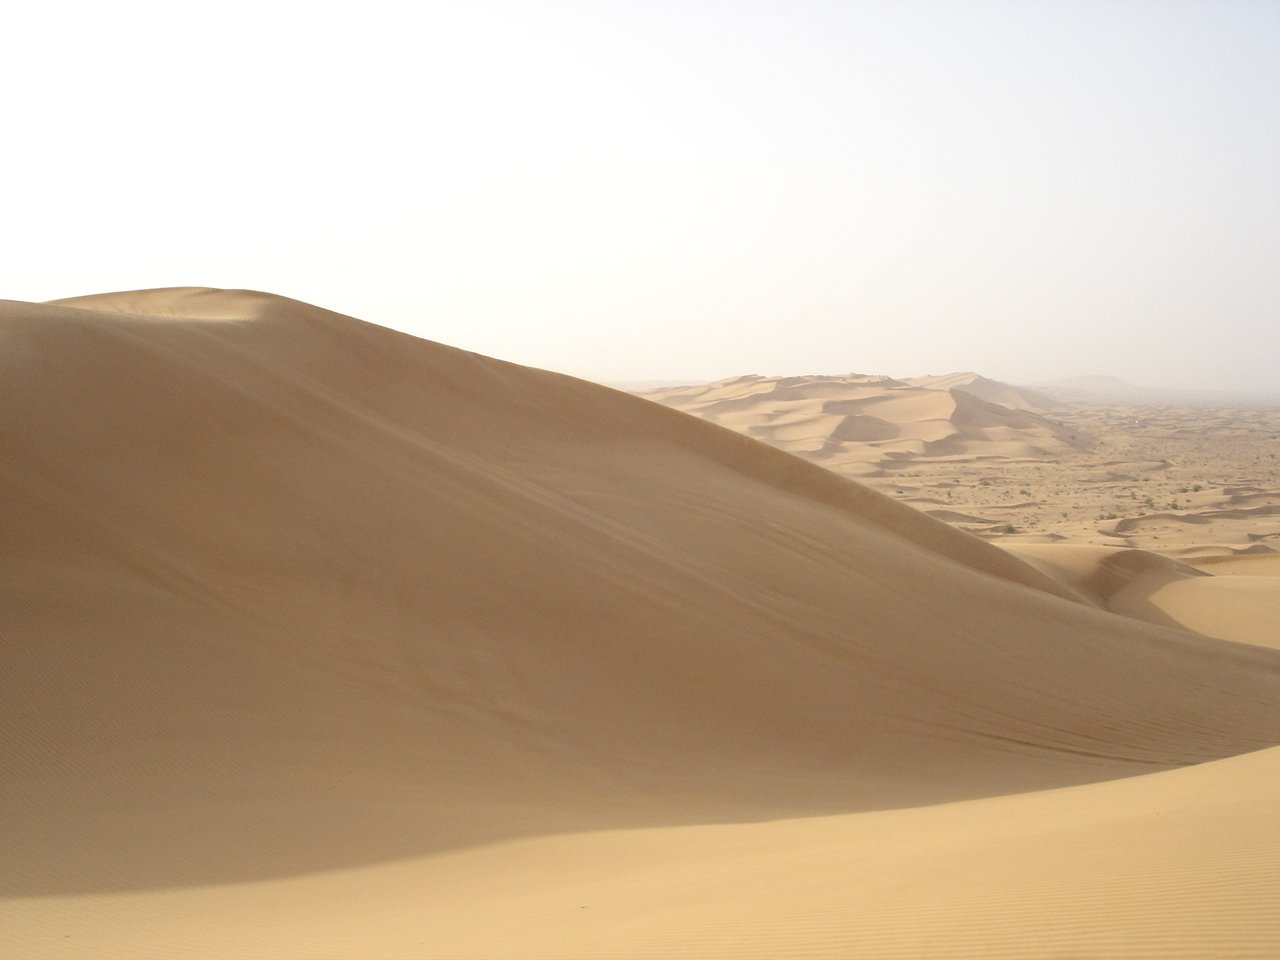 a very big pretty desert with sand dunes